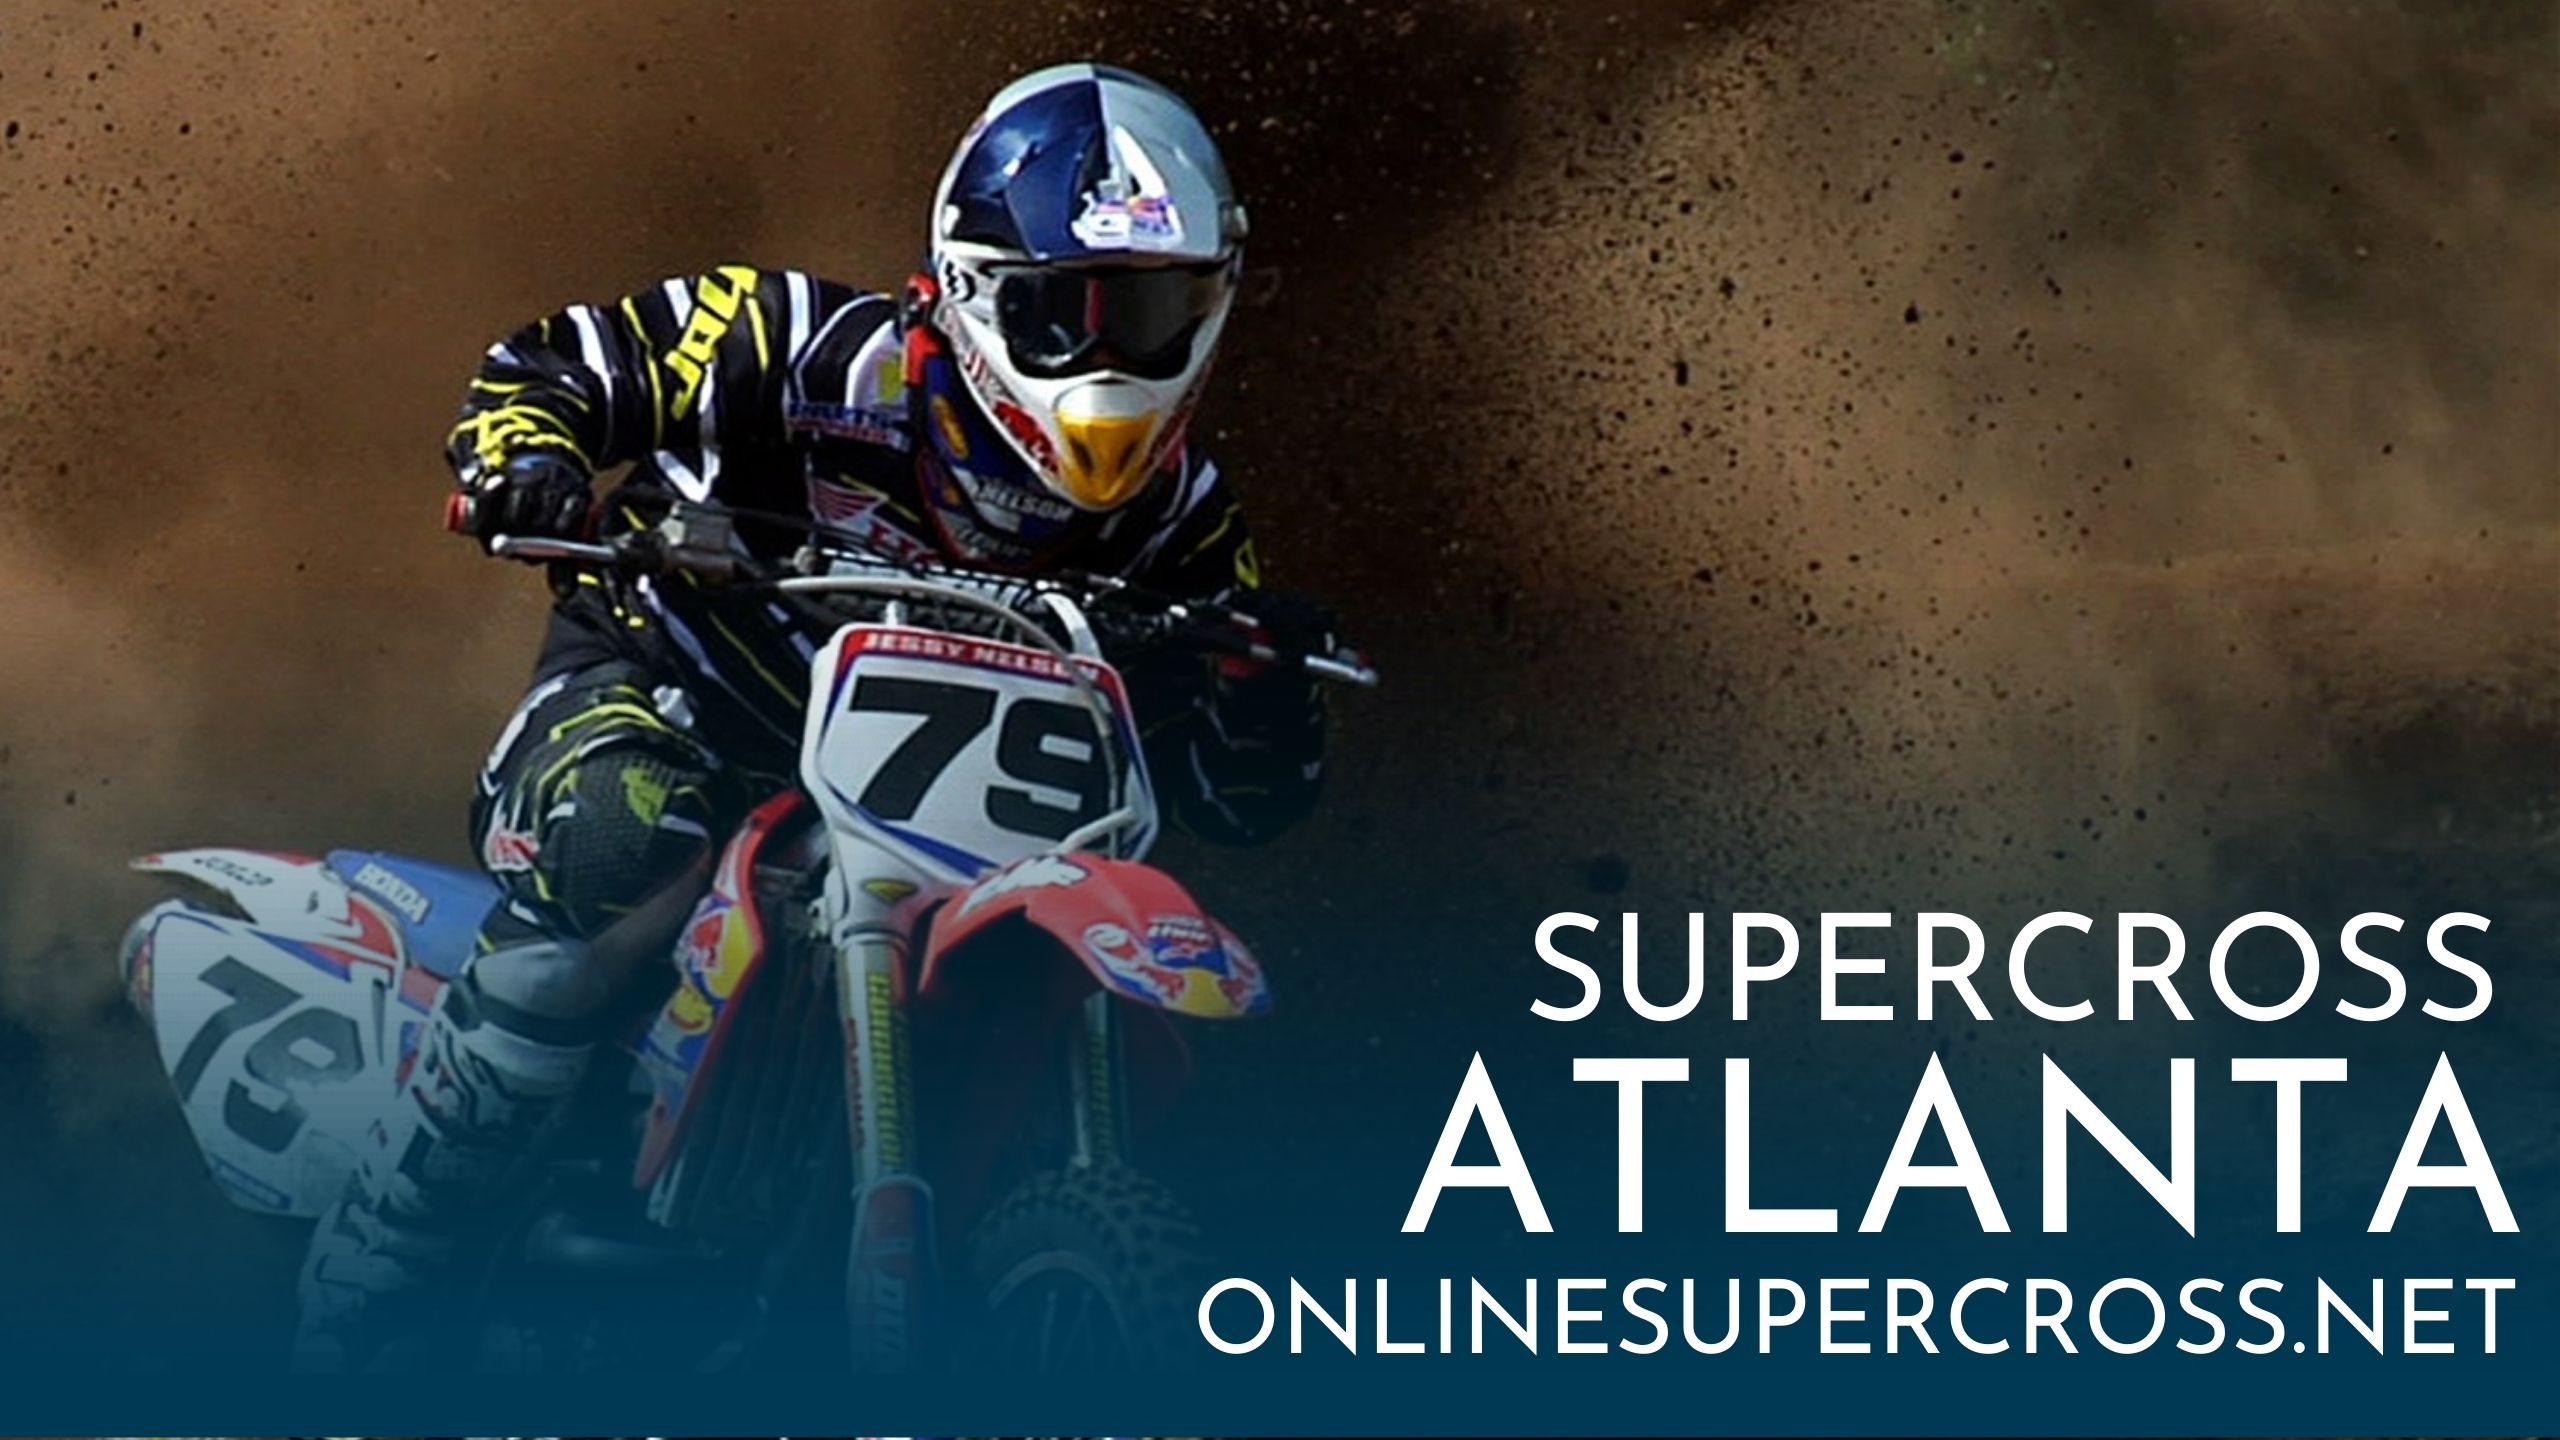 Live Monster Energy AMA Supercross St Louis Round 14 Racing 2016 Online